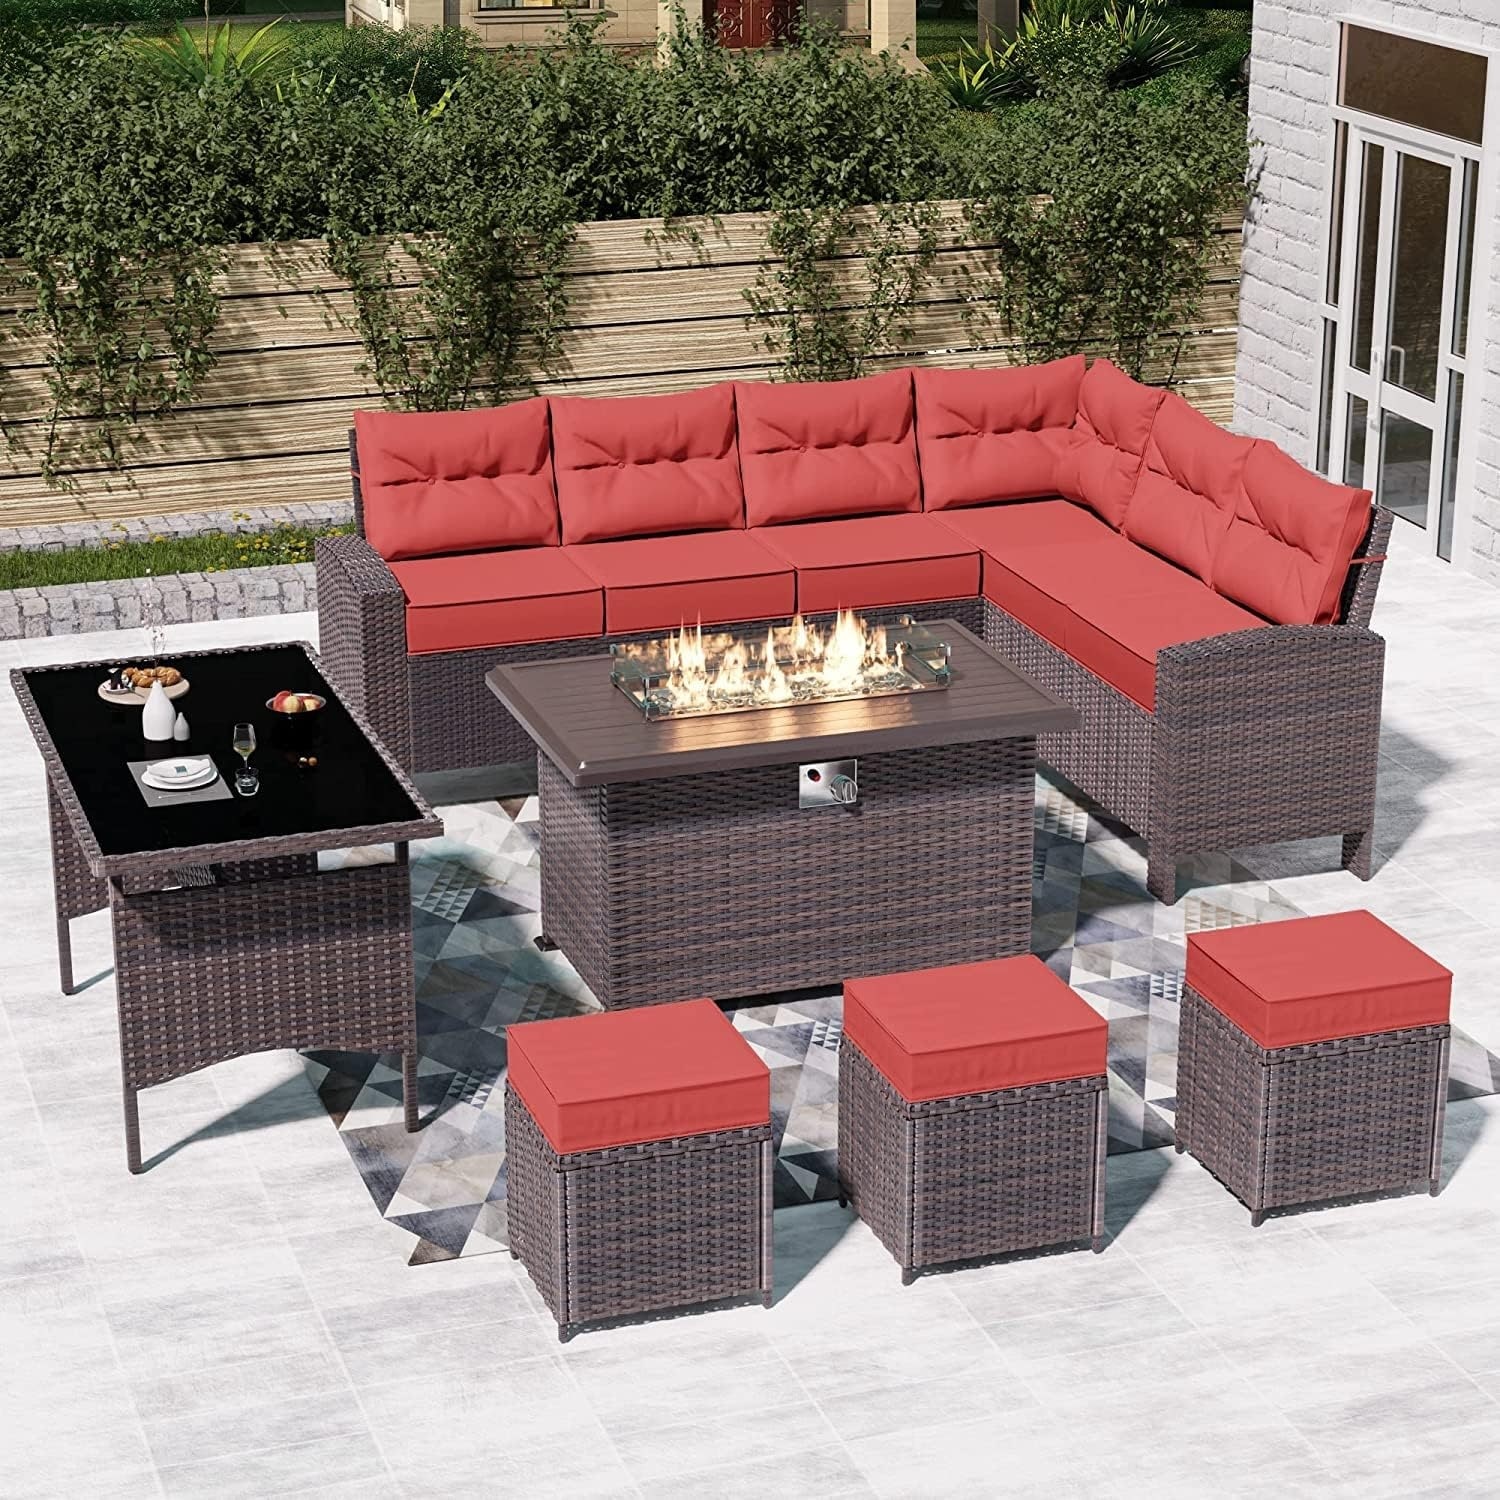 Kullavik 7 Piece Rattan Outdoor Sectional Conversation Patio Furniture Set  Wicker Sofa Dining Table With Chair  Firepit Table